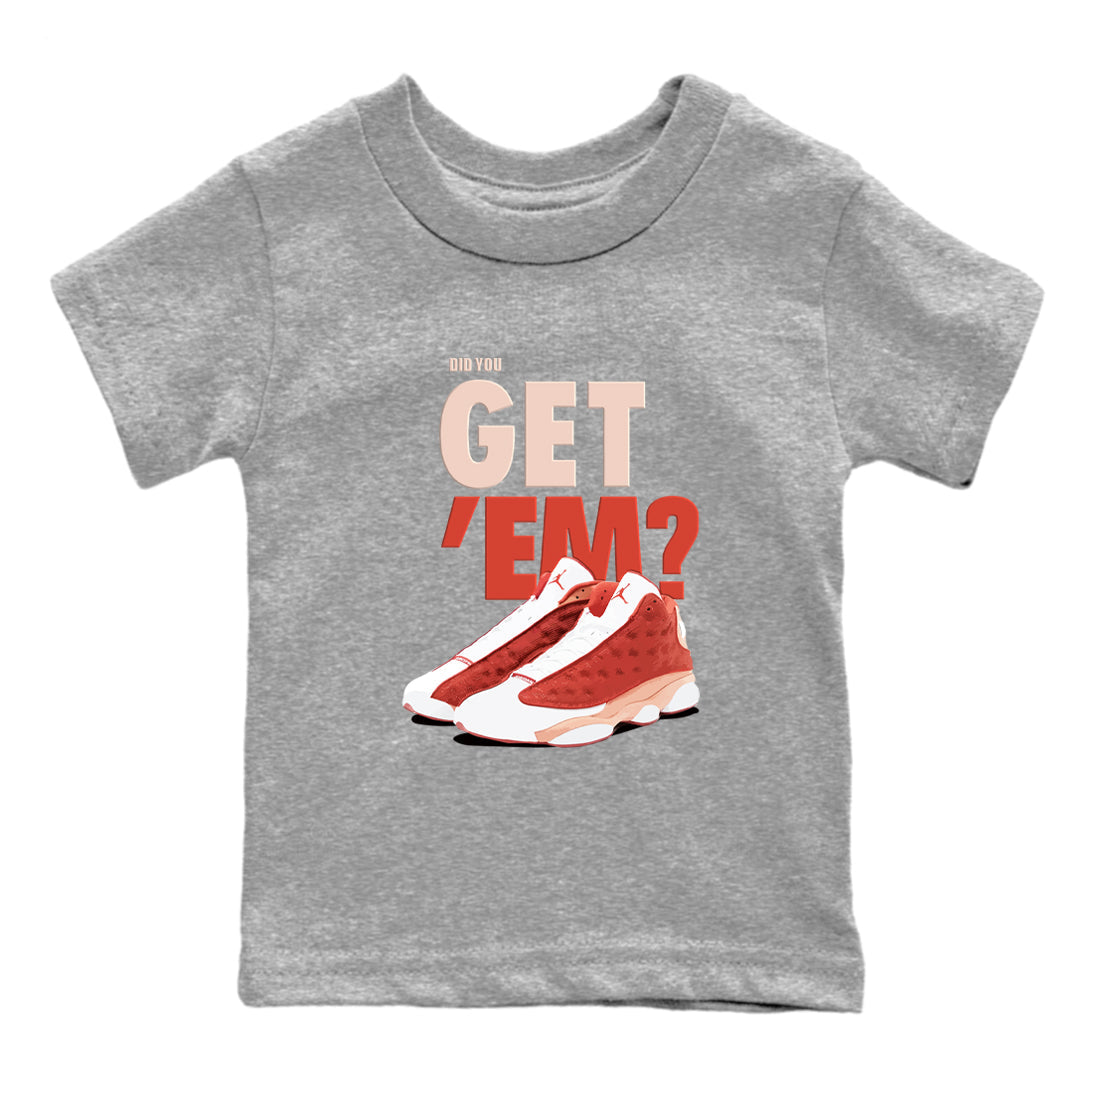 13s Dune Red shirts to match jordans Did You Get 'Em sneaker match tees Air Jordan 13 Dune Red SNRT Sneaker Tees streetwear brand Baby and Youth Heather Grey 2 cotton tee